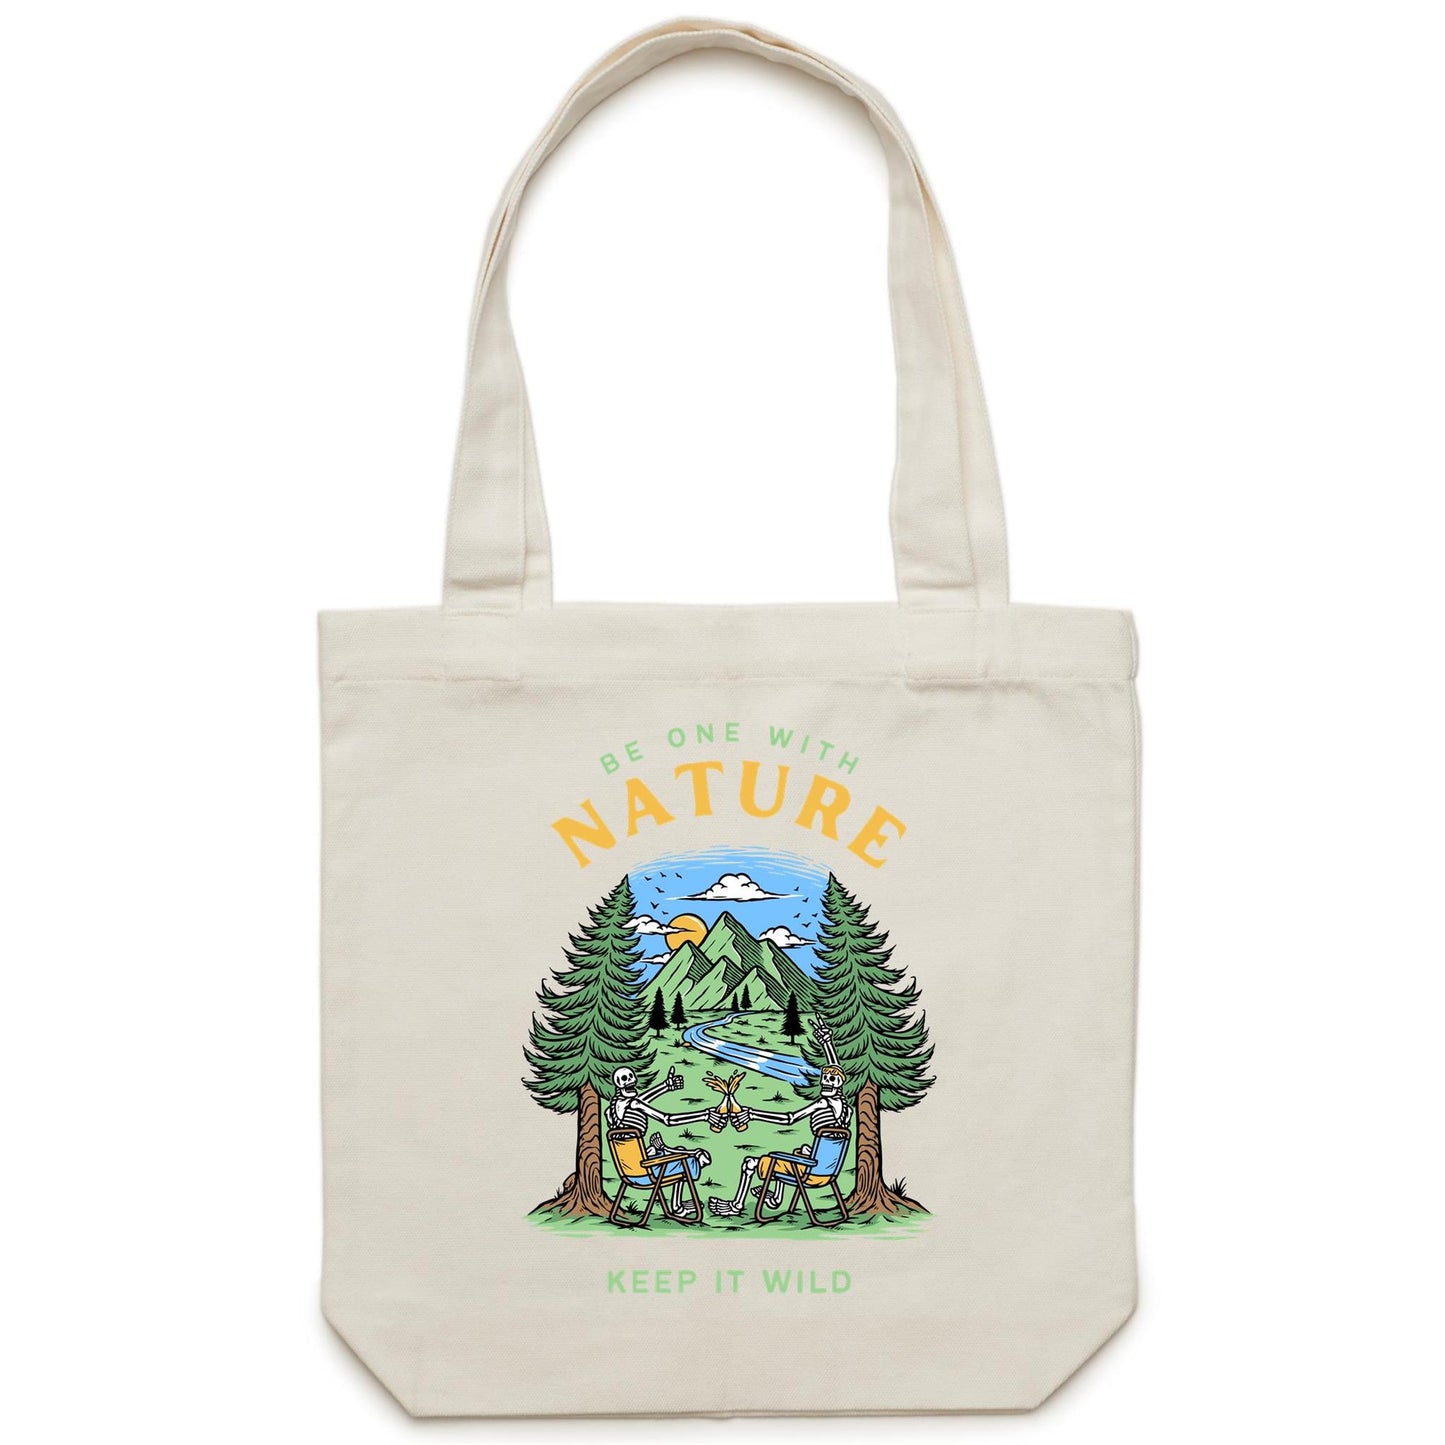 Be One With Nature, Skeleton - Canvas Tote Bag Cream One Size Tote Bag Environment Summer